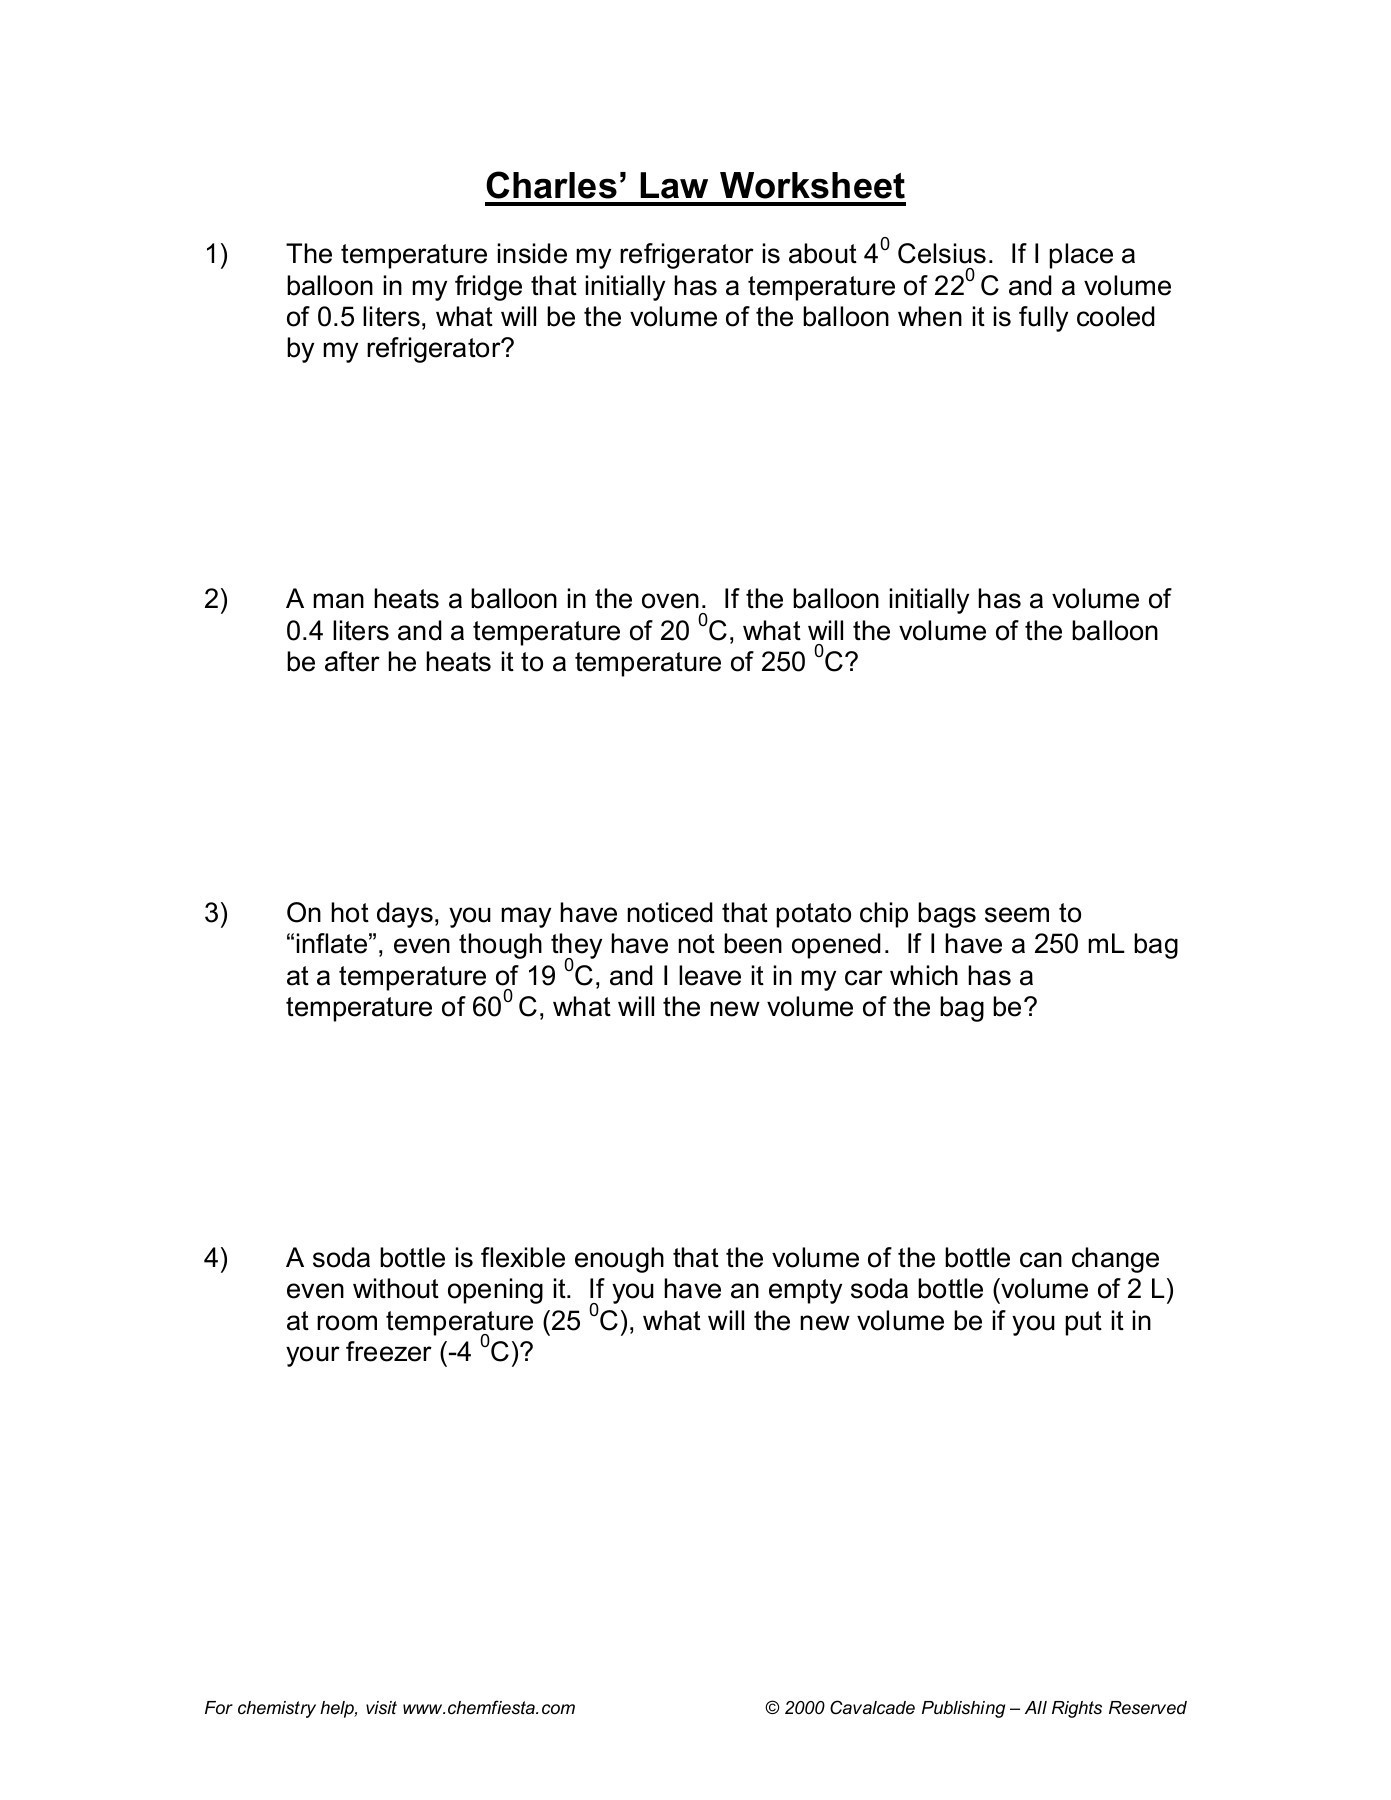 Charles Law Worksheet Answers Charles Law Worksheet Misterguchinkster Pages 1